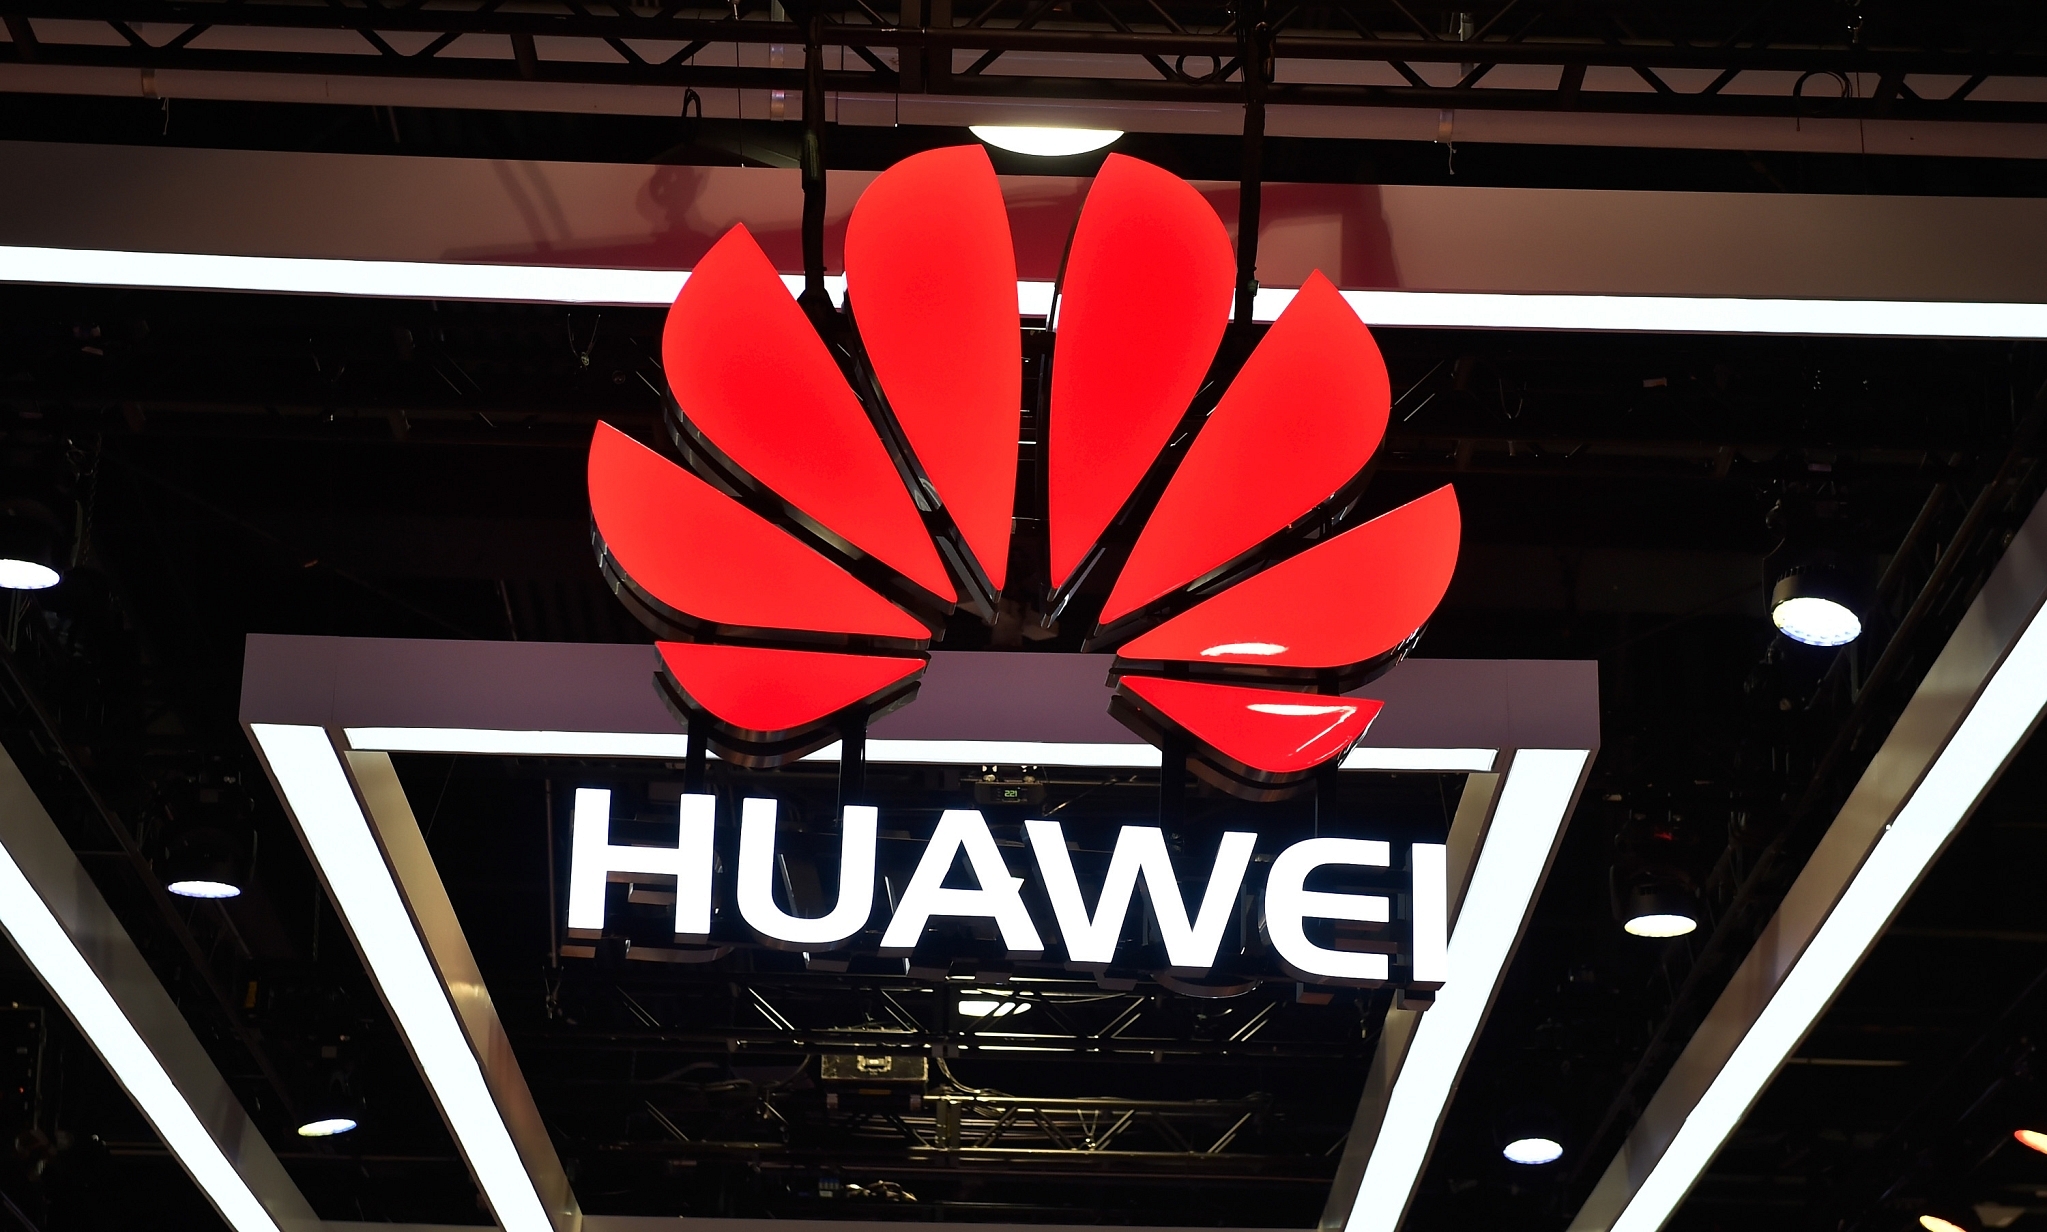 Huawei pavilion at the CES 2018 expo in Las Vegas Nevada (Representative Image) (David Becker/Getty Images)